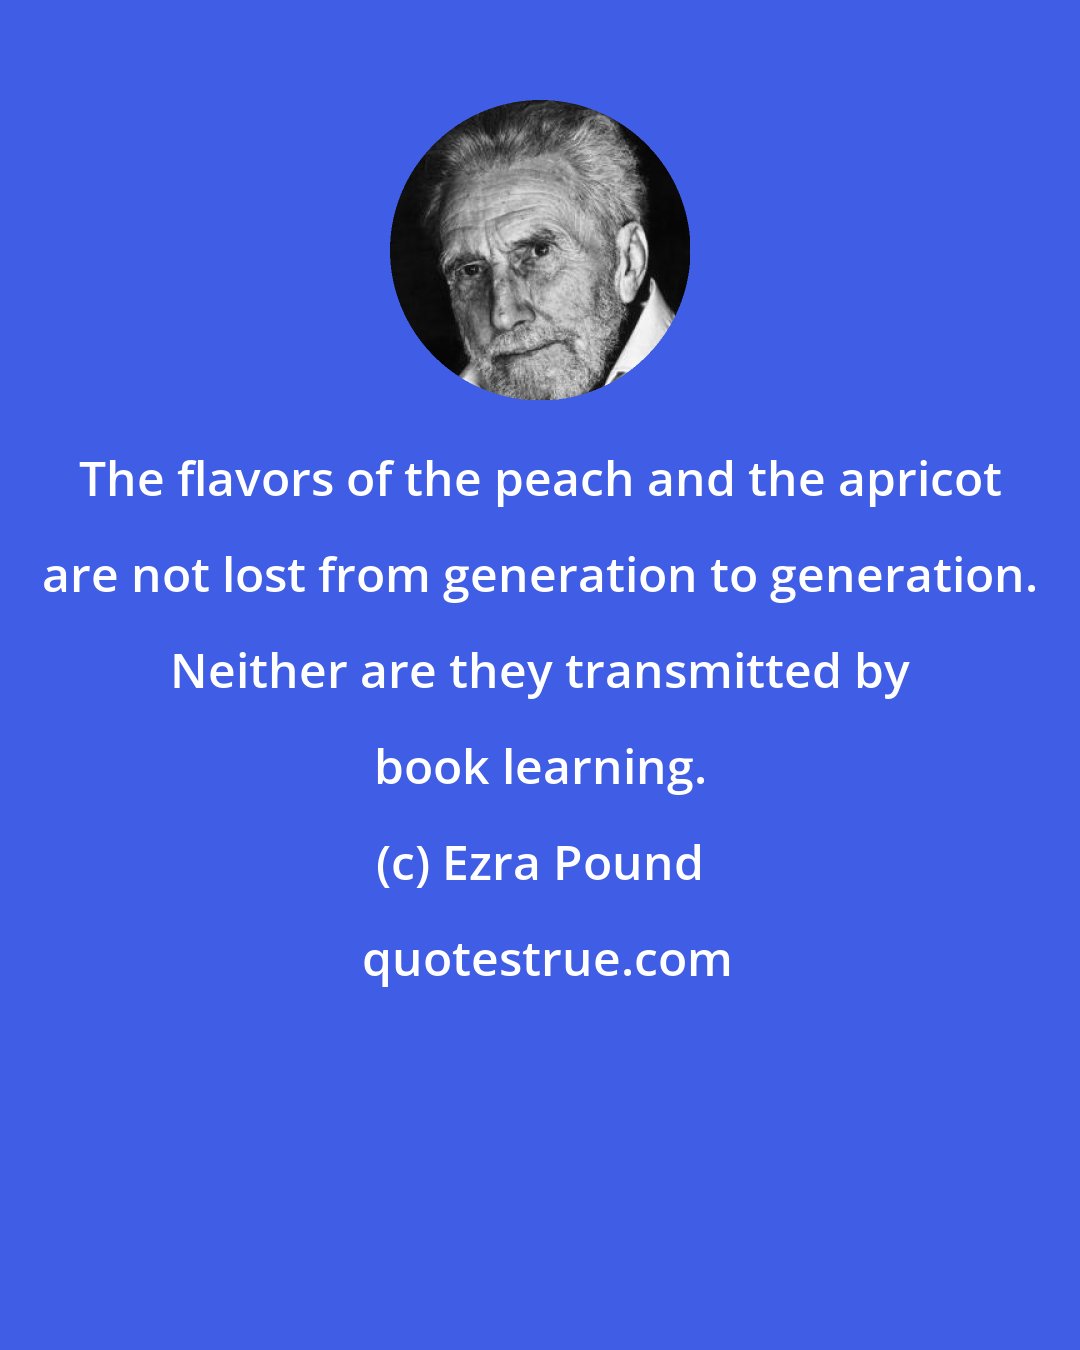 Ezra Pound: The flavors of the peach and the apricot are not lost from generation to generation. Neither are they transmitted by book learning.